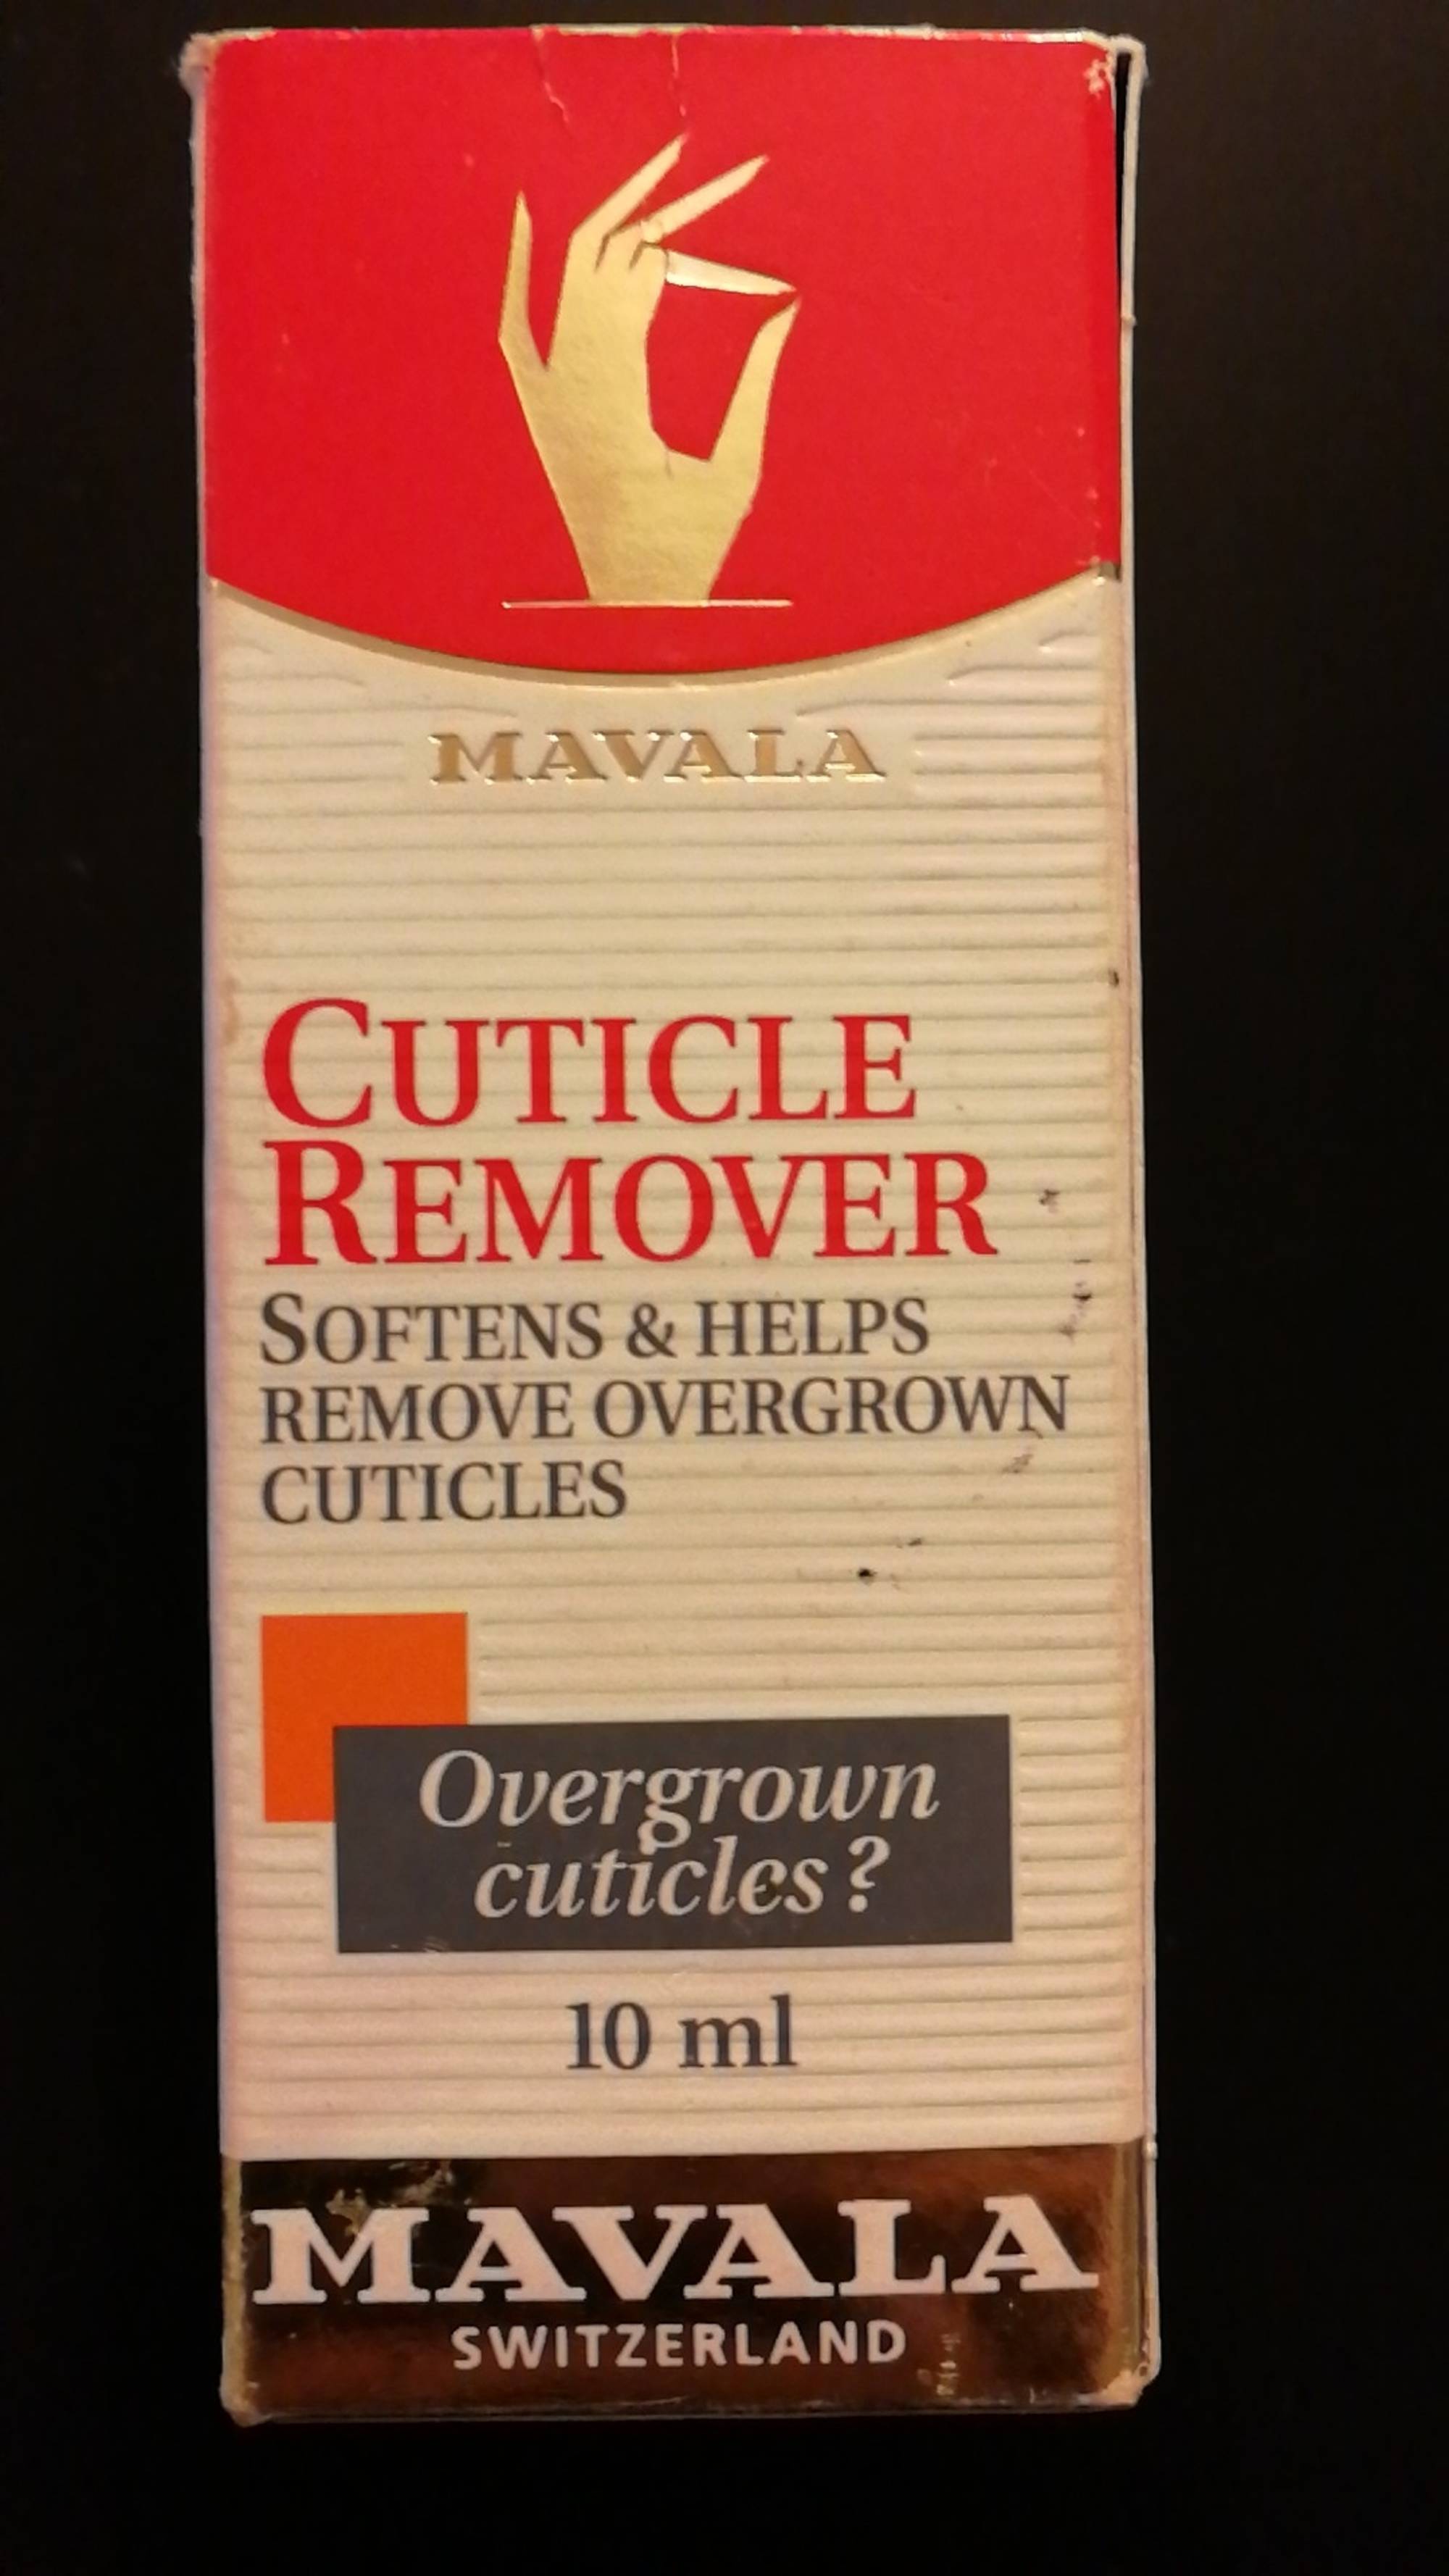 MAVALA - Cuticle remover softens & helps 